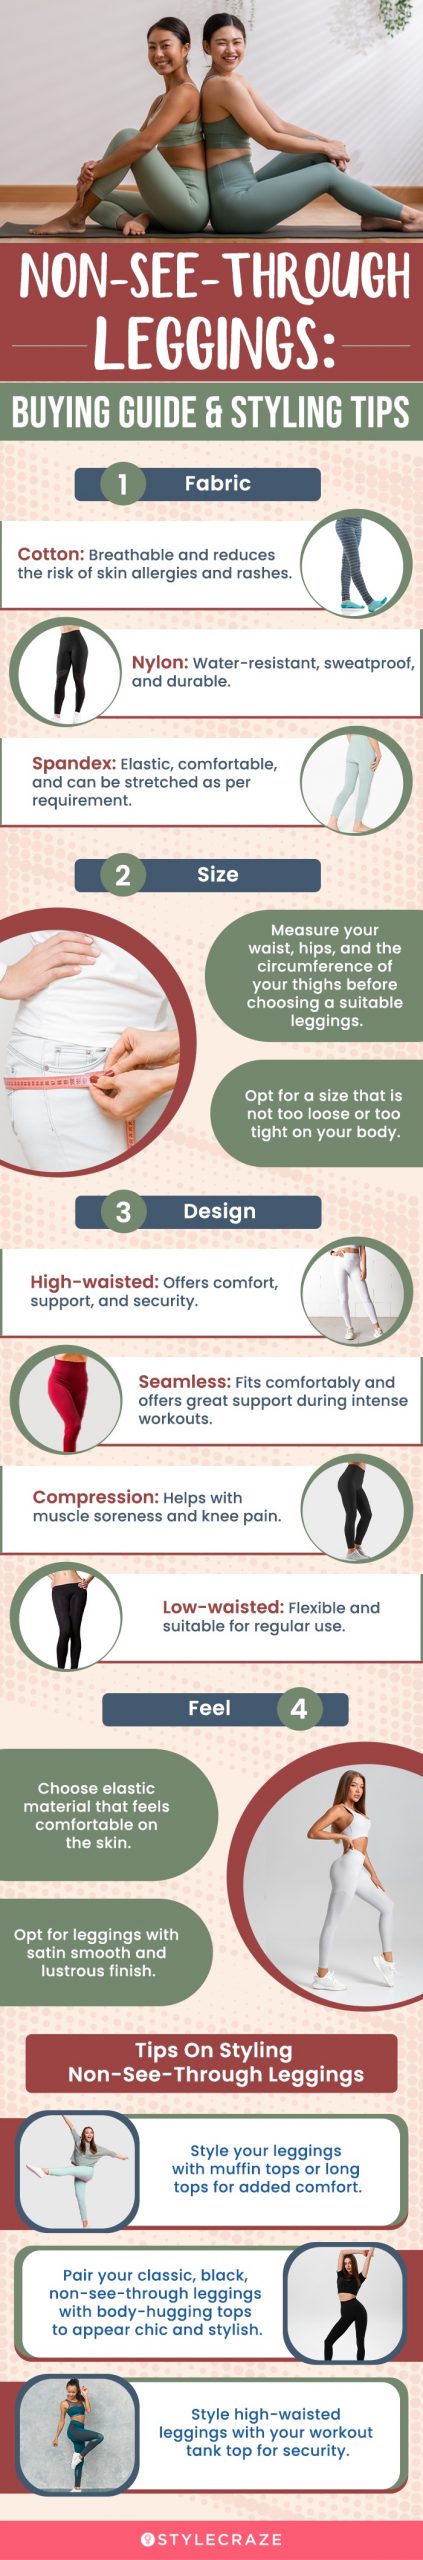 Non-See-Through Leggings: Buying Guide & Styling Tips (infographic)